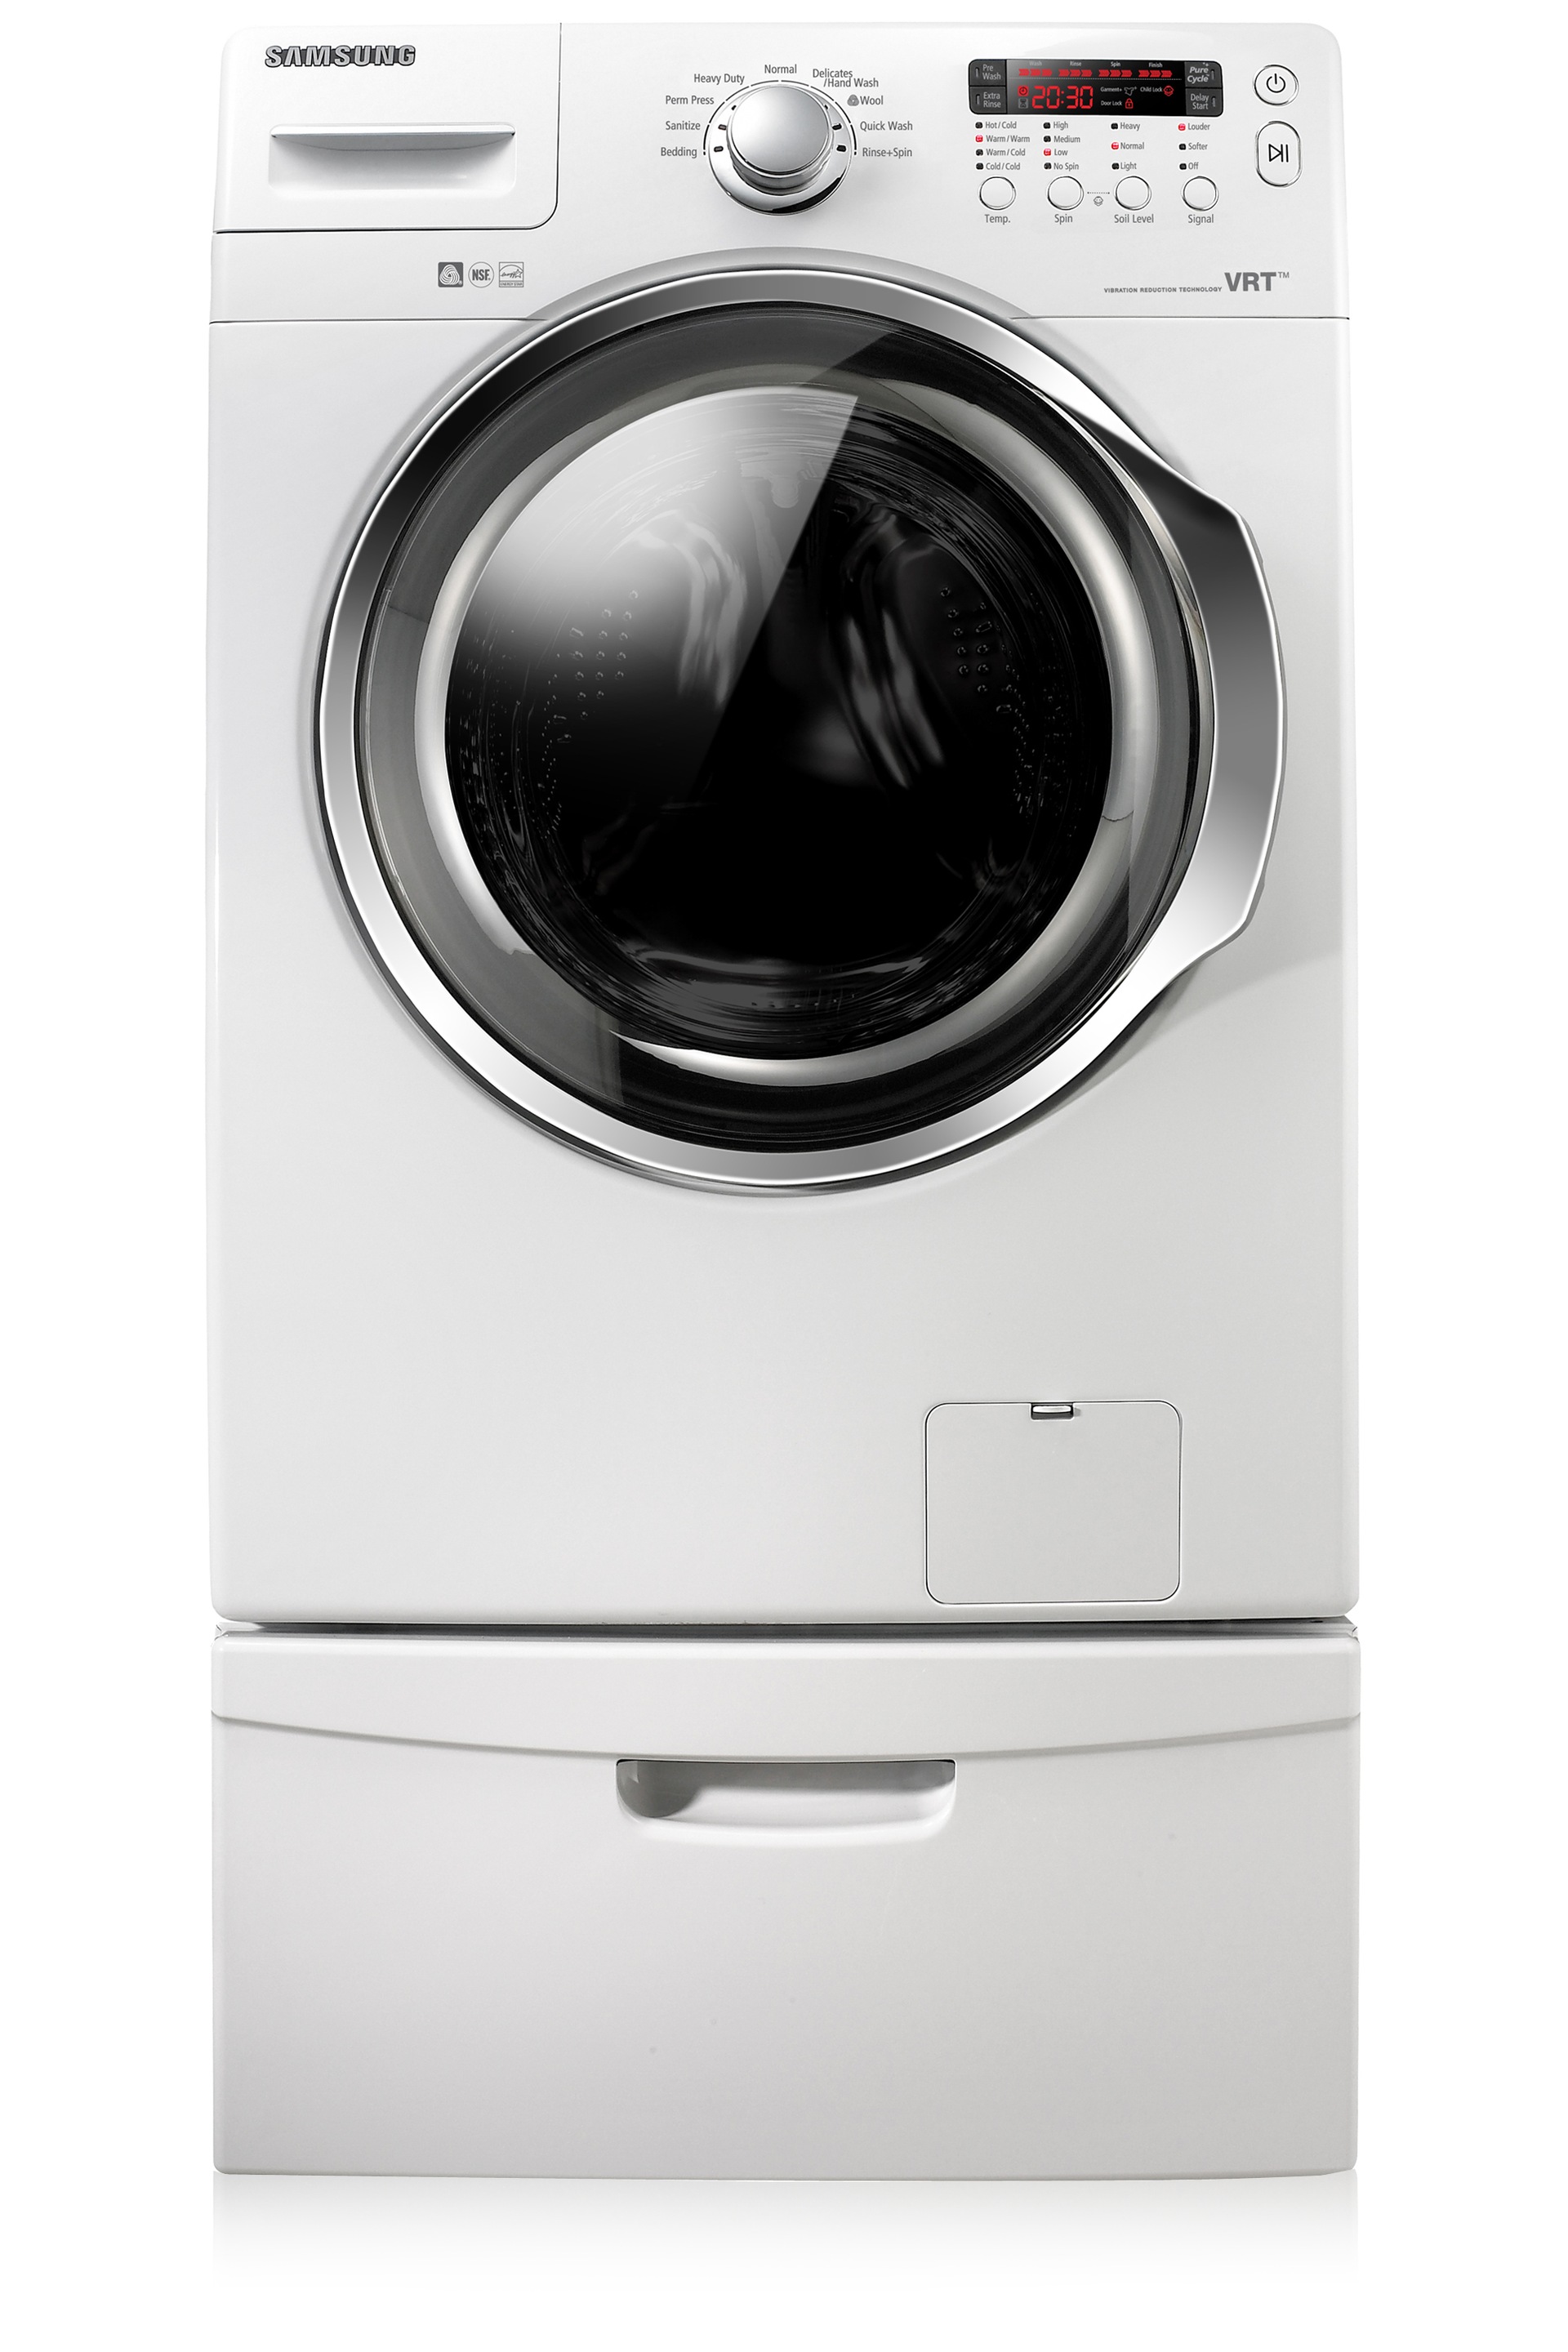 WF330ANW 4.3 cu. ft. Front Load Washer White | Samsung CA